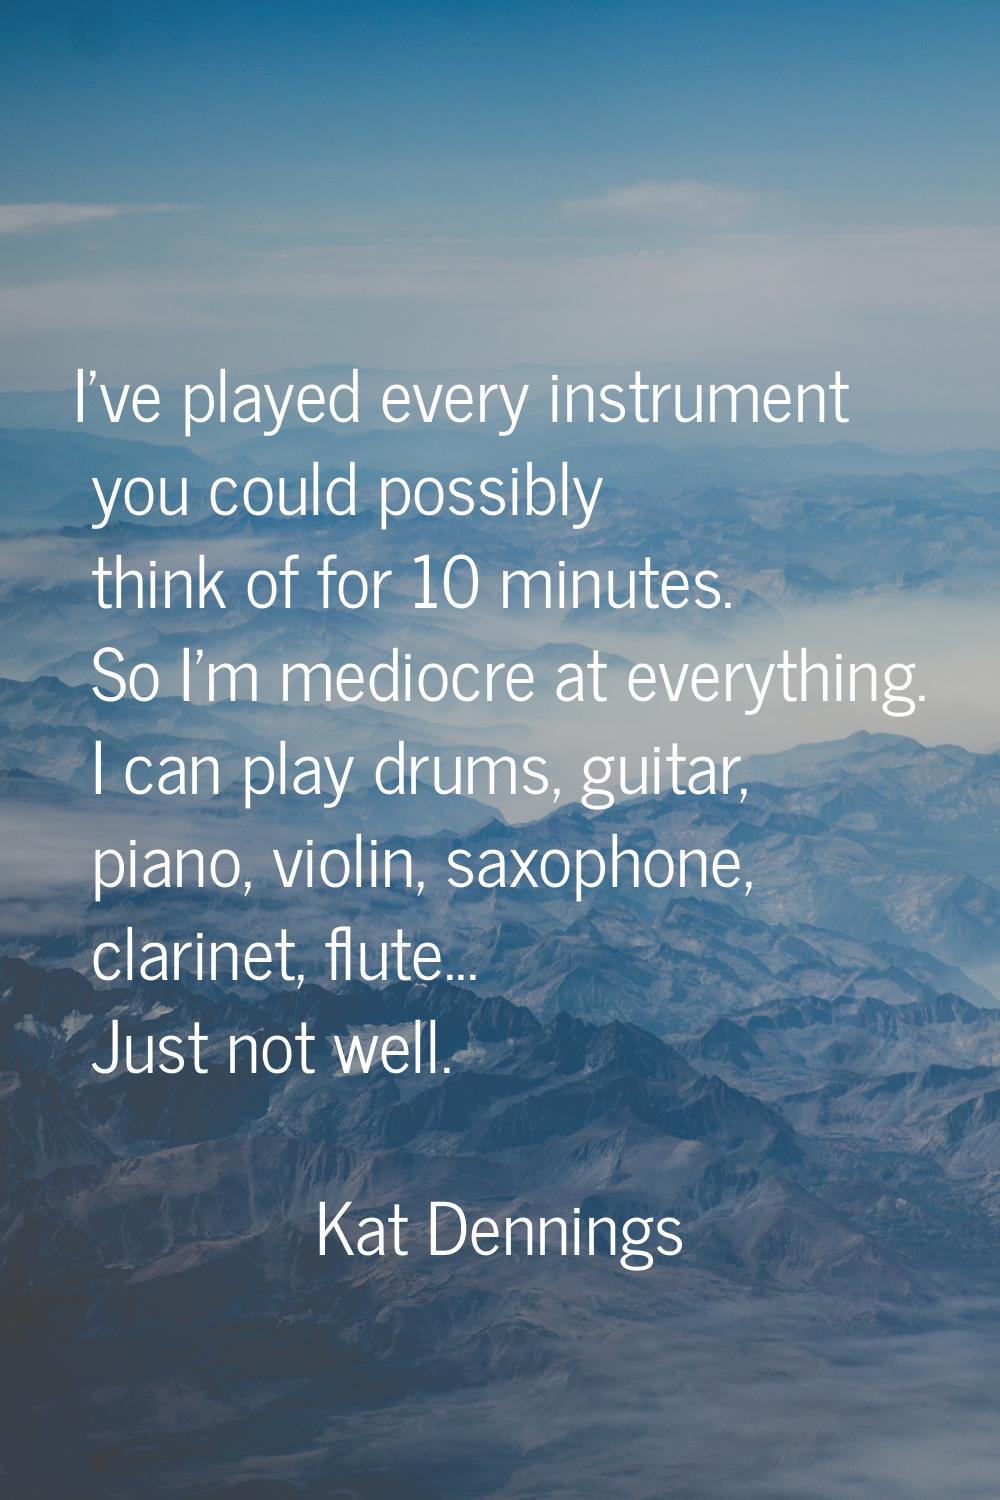 I've played every instrument you could possibly think of for 10 minutes. So I'm mediocre at everyth